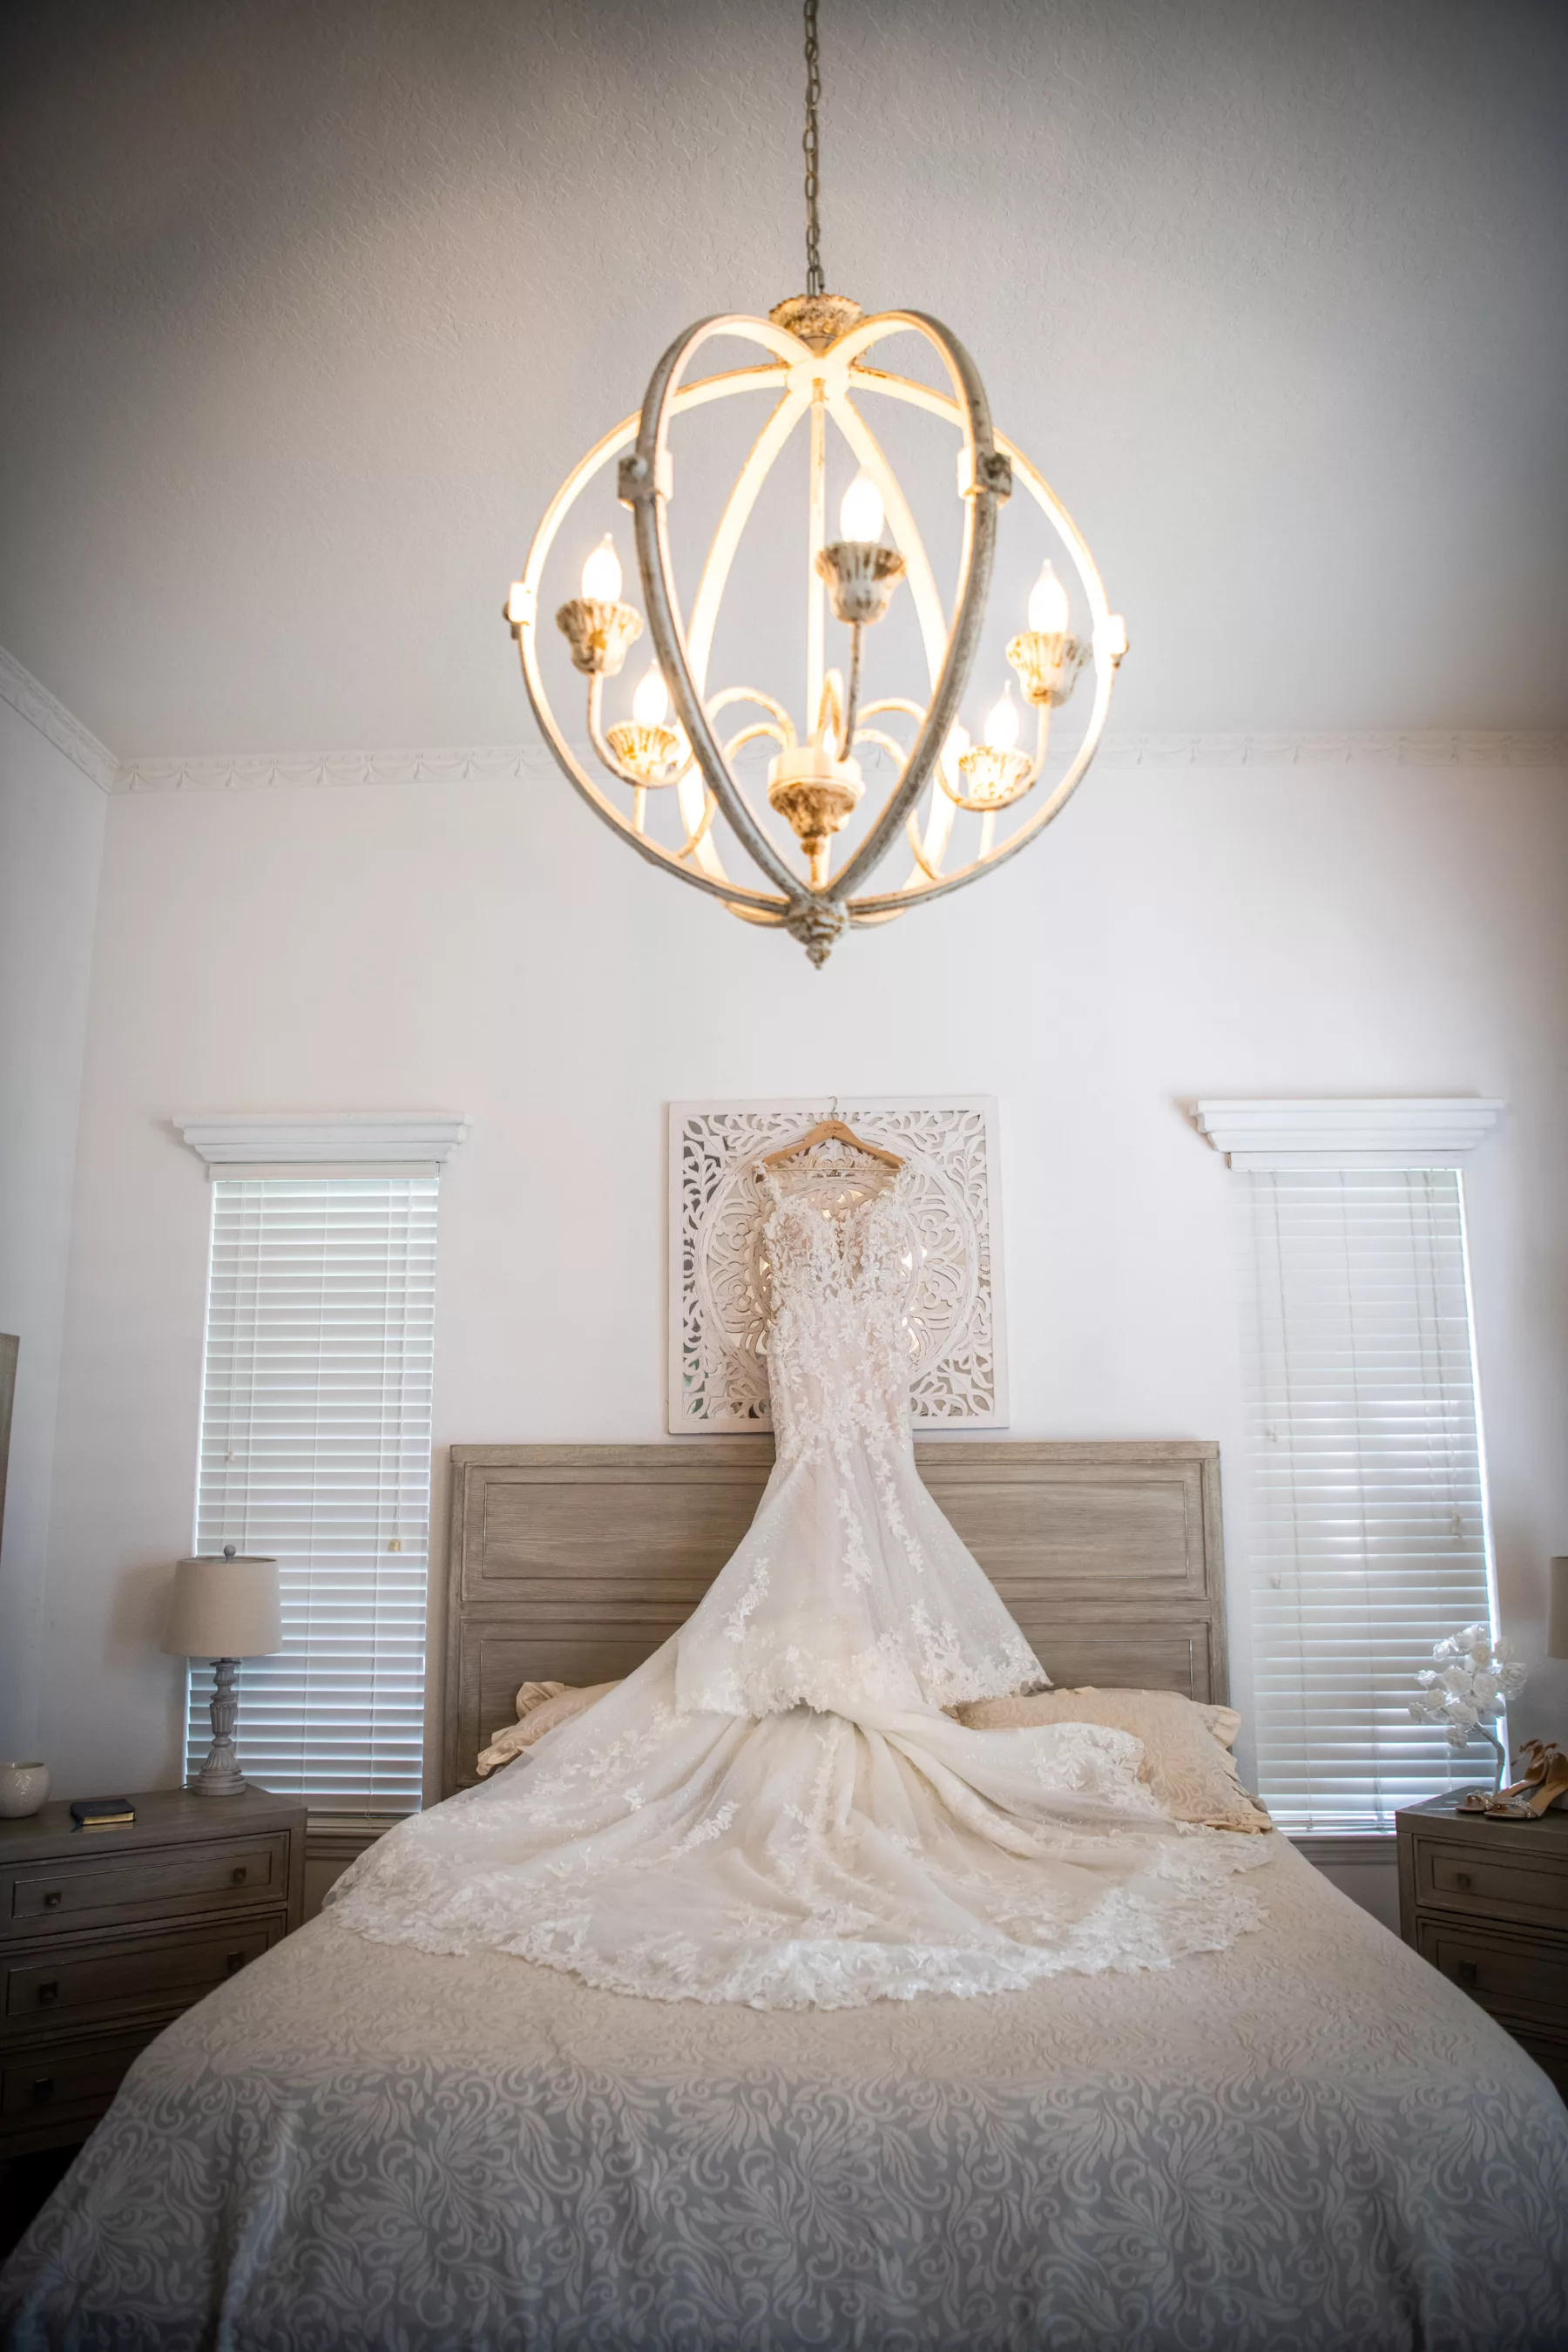 Bridal Estate Get Ready Room Ideas | Ivory Lace Illusion Off The Shoulder Open Back Mermaid Wedding Dress Inspiration